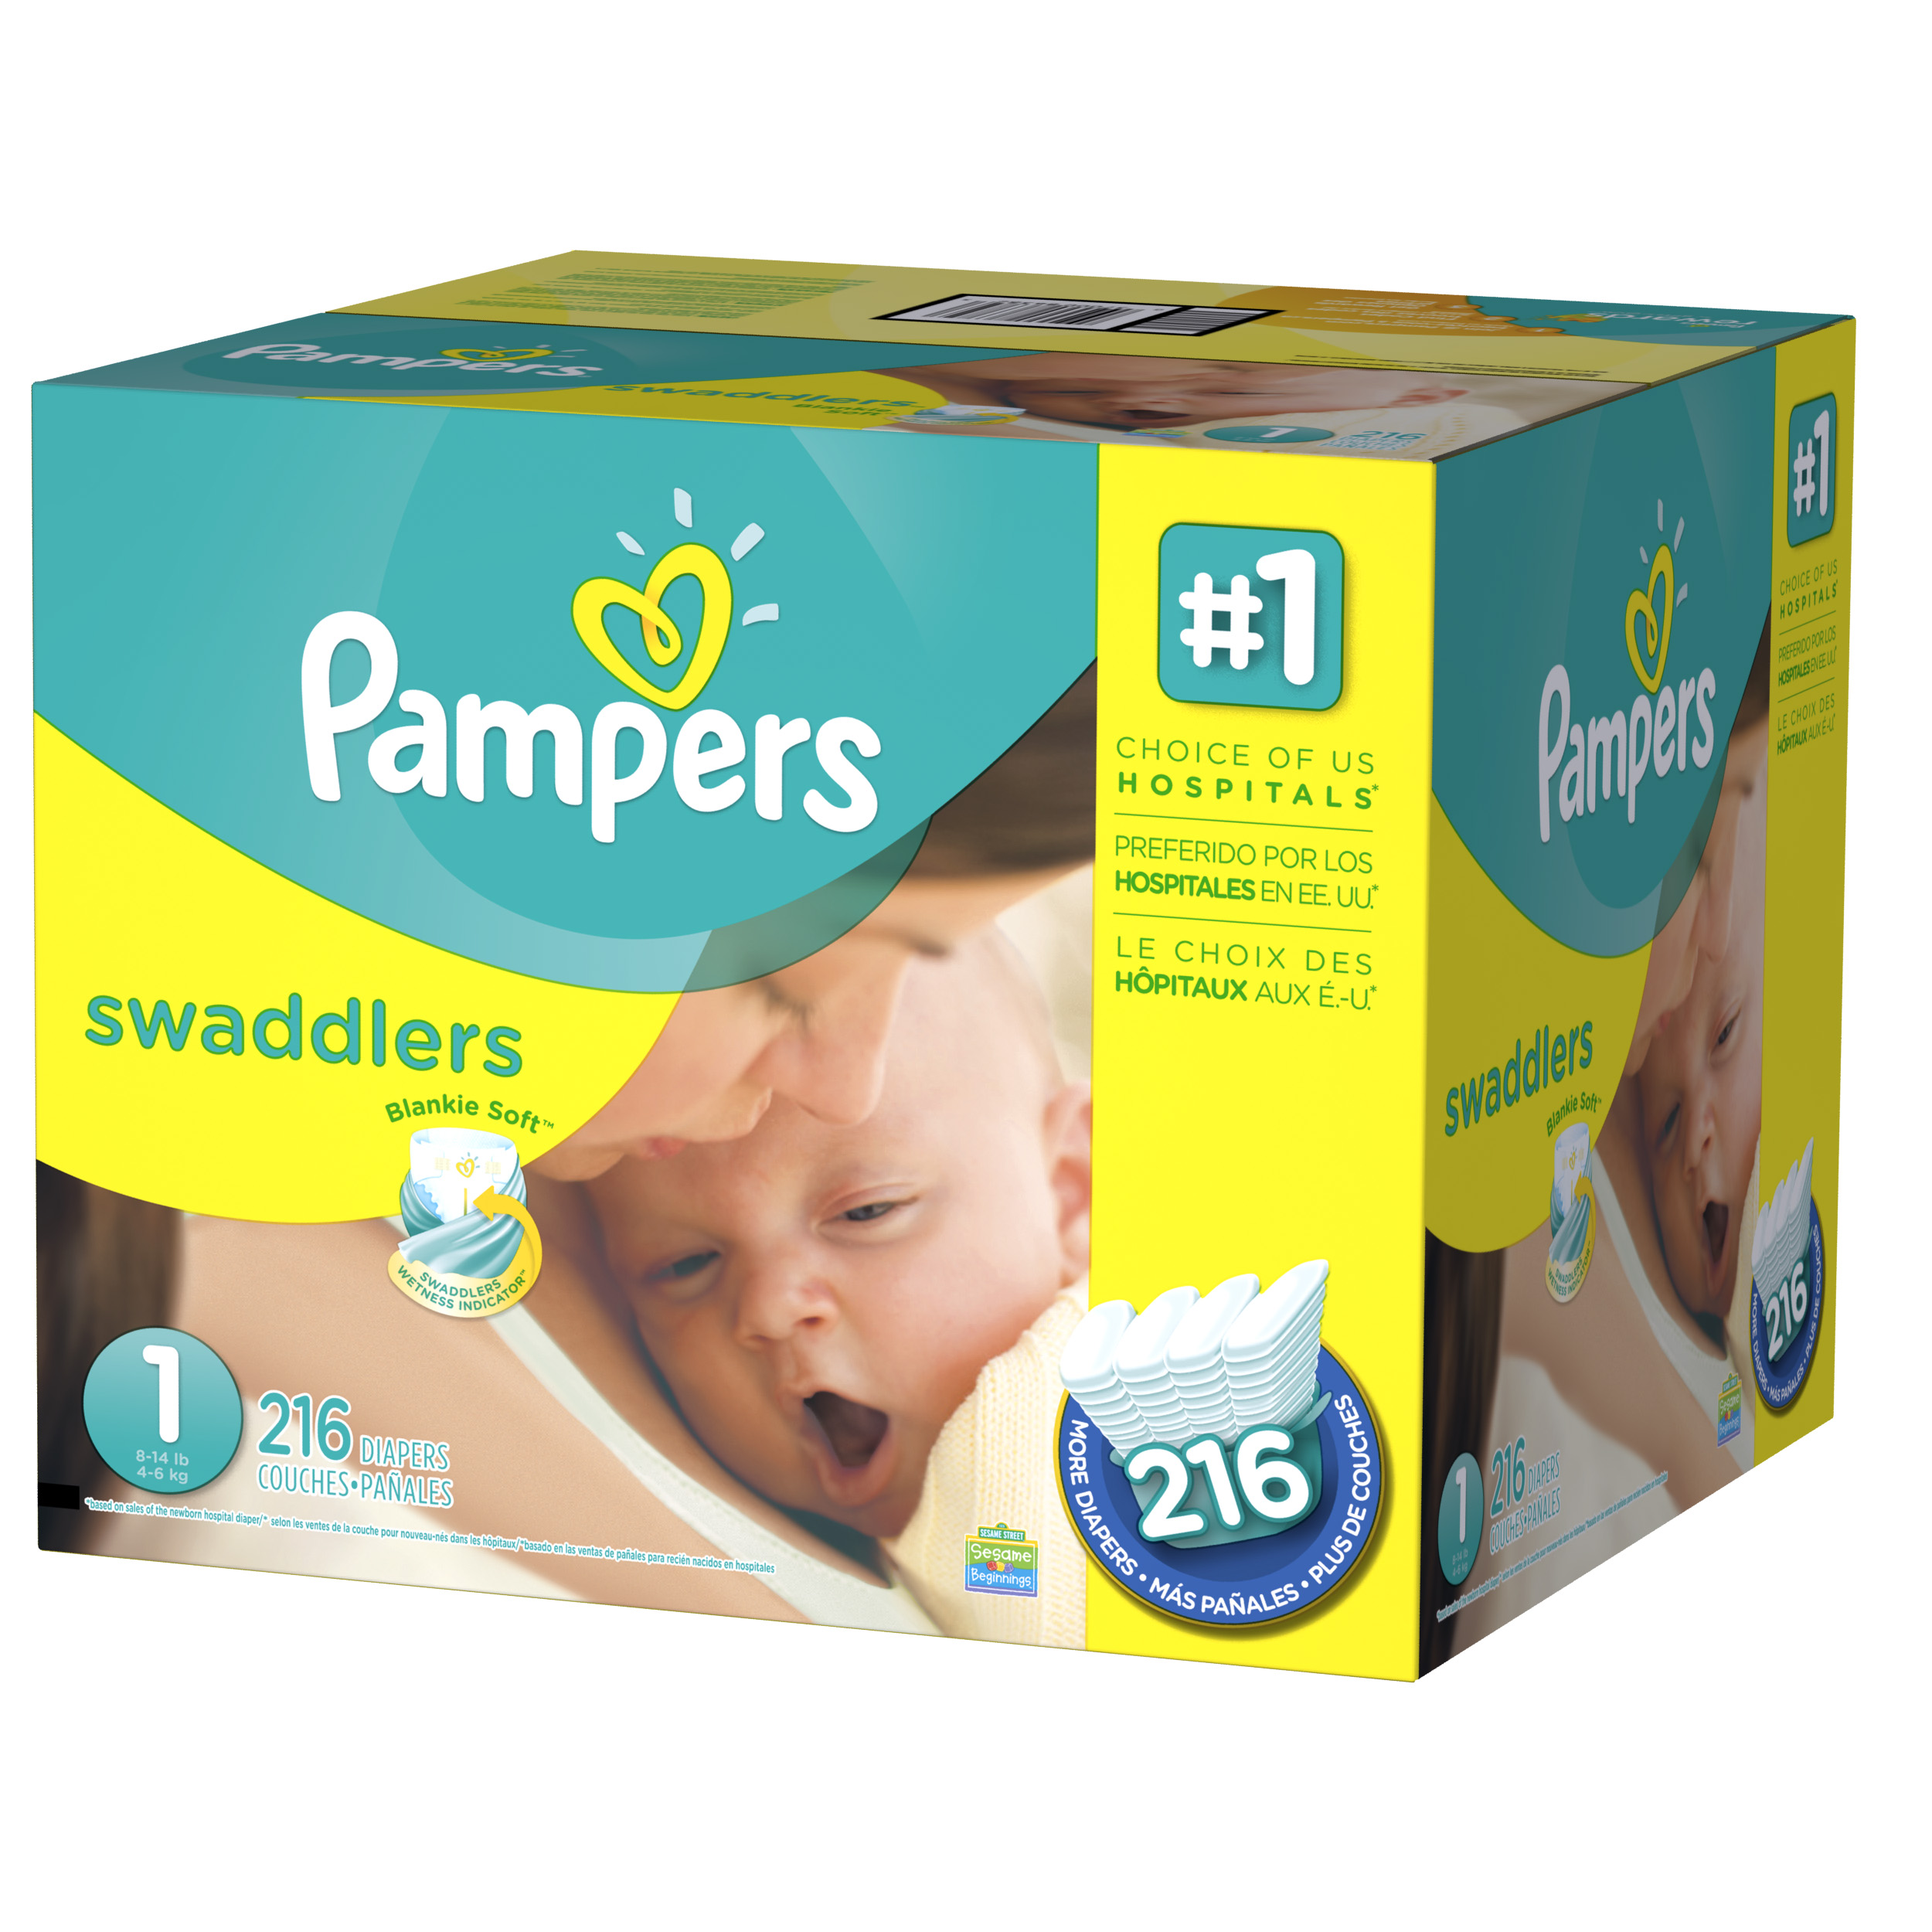 Pampers Swaddlers Diapers, Size 1, 216 Diapers - image 1 of 10